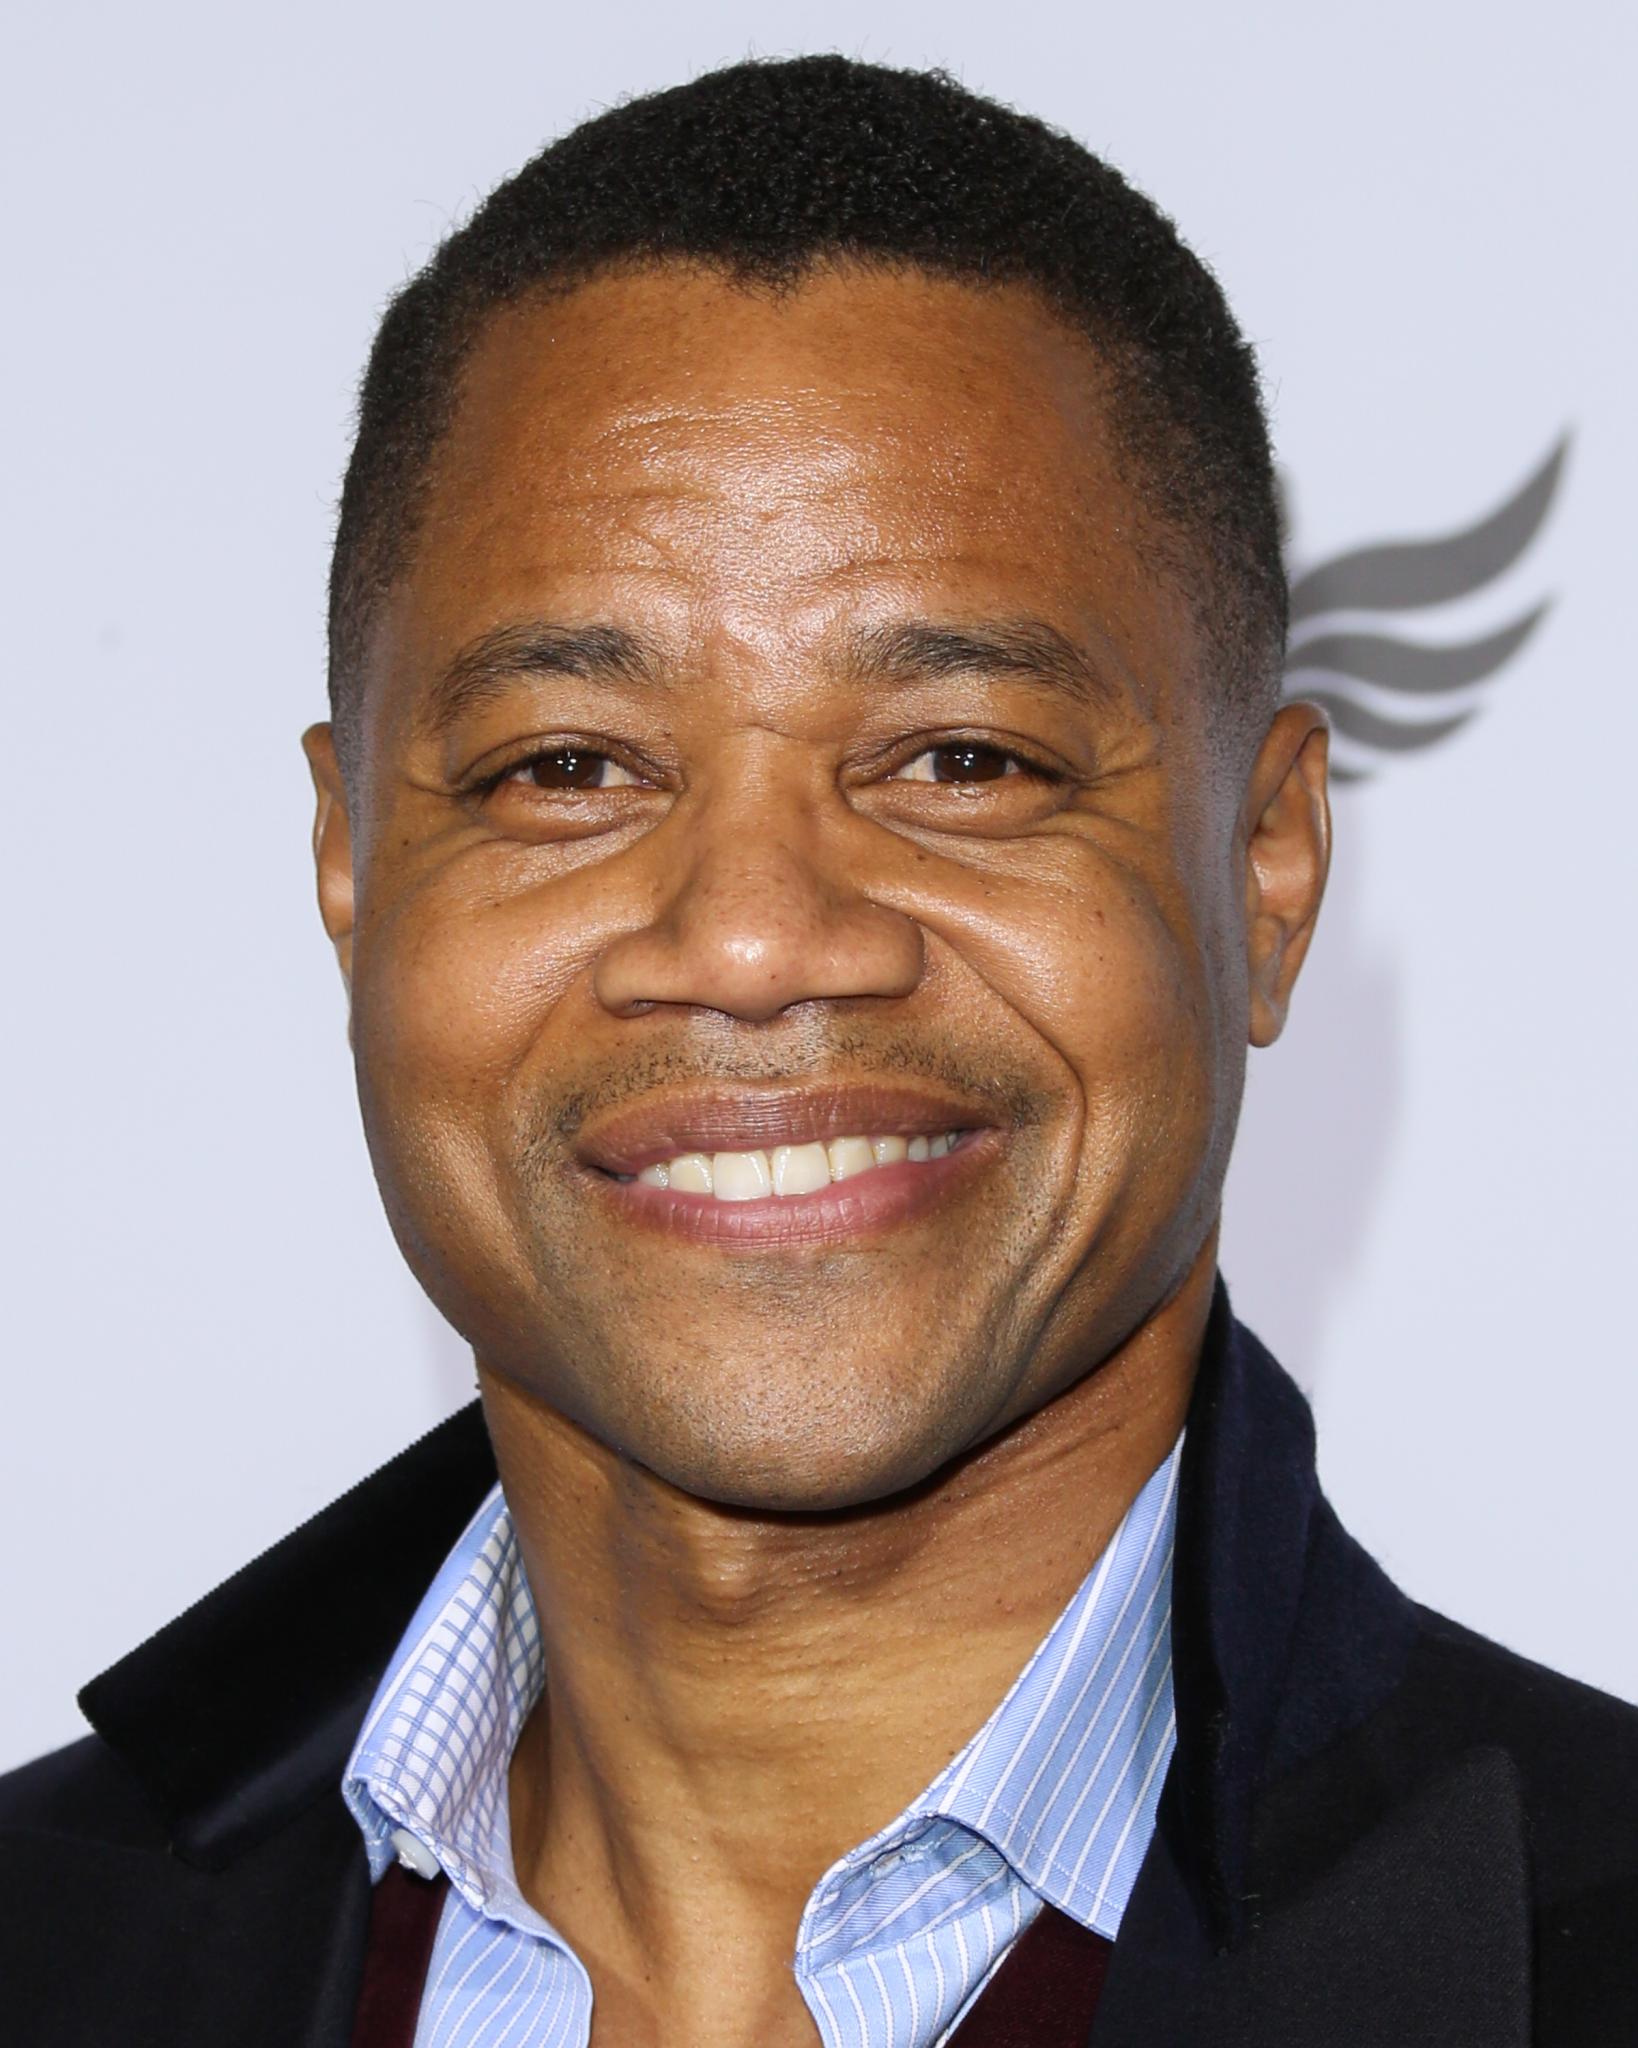 Cuba Gooding Explains Why He Broke Down and 'Wept' While Filming The People v. O.J. Simpson